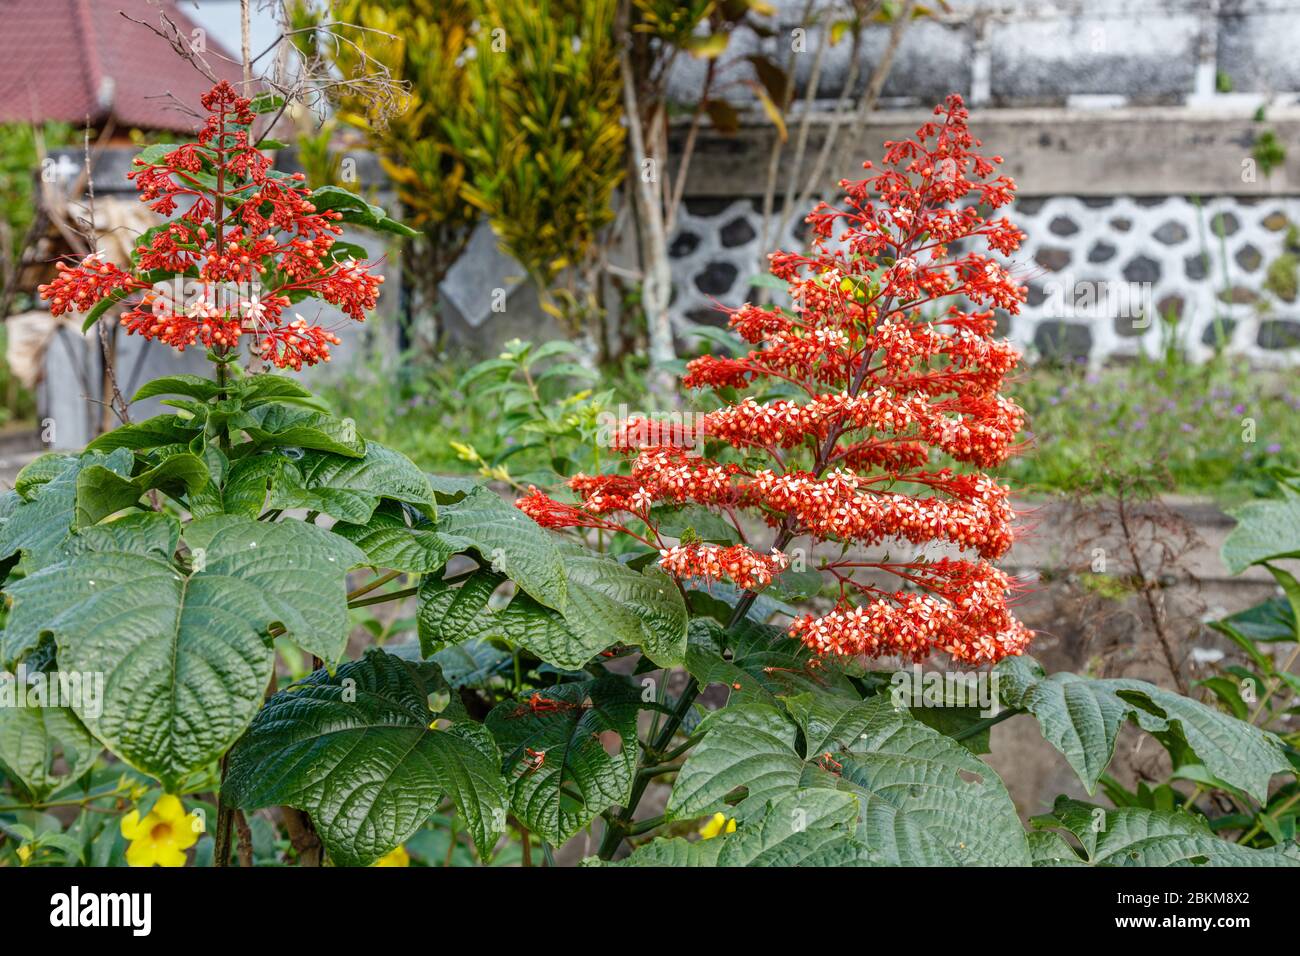 Red blooming Pagoda Flower, or Clerodendrum Paniculatum, Bali, Indonesia. Stock Photo